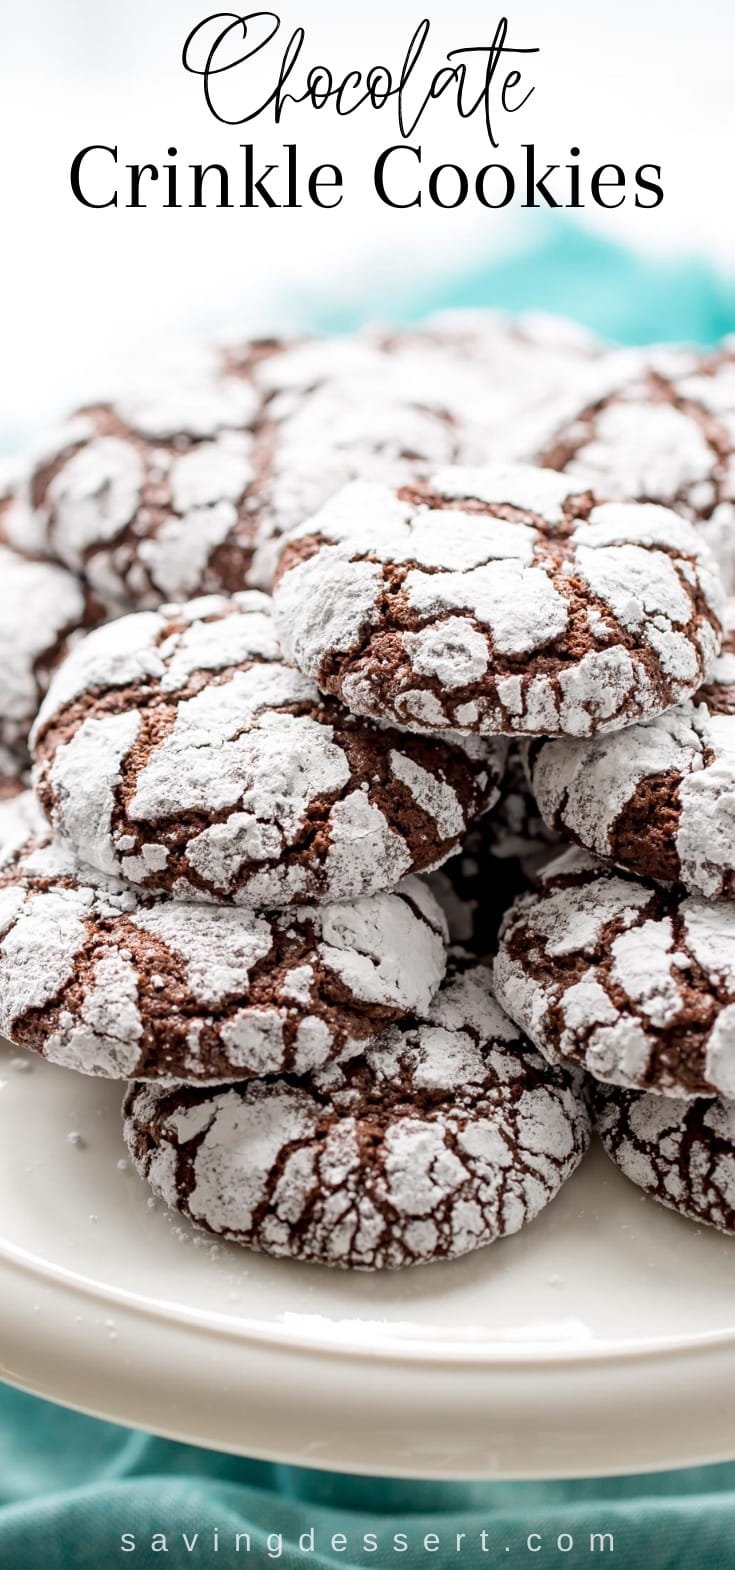 Chocolate Crinkle Cookies stacked on a cake platter